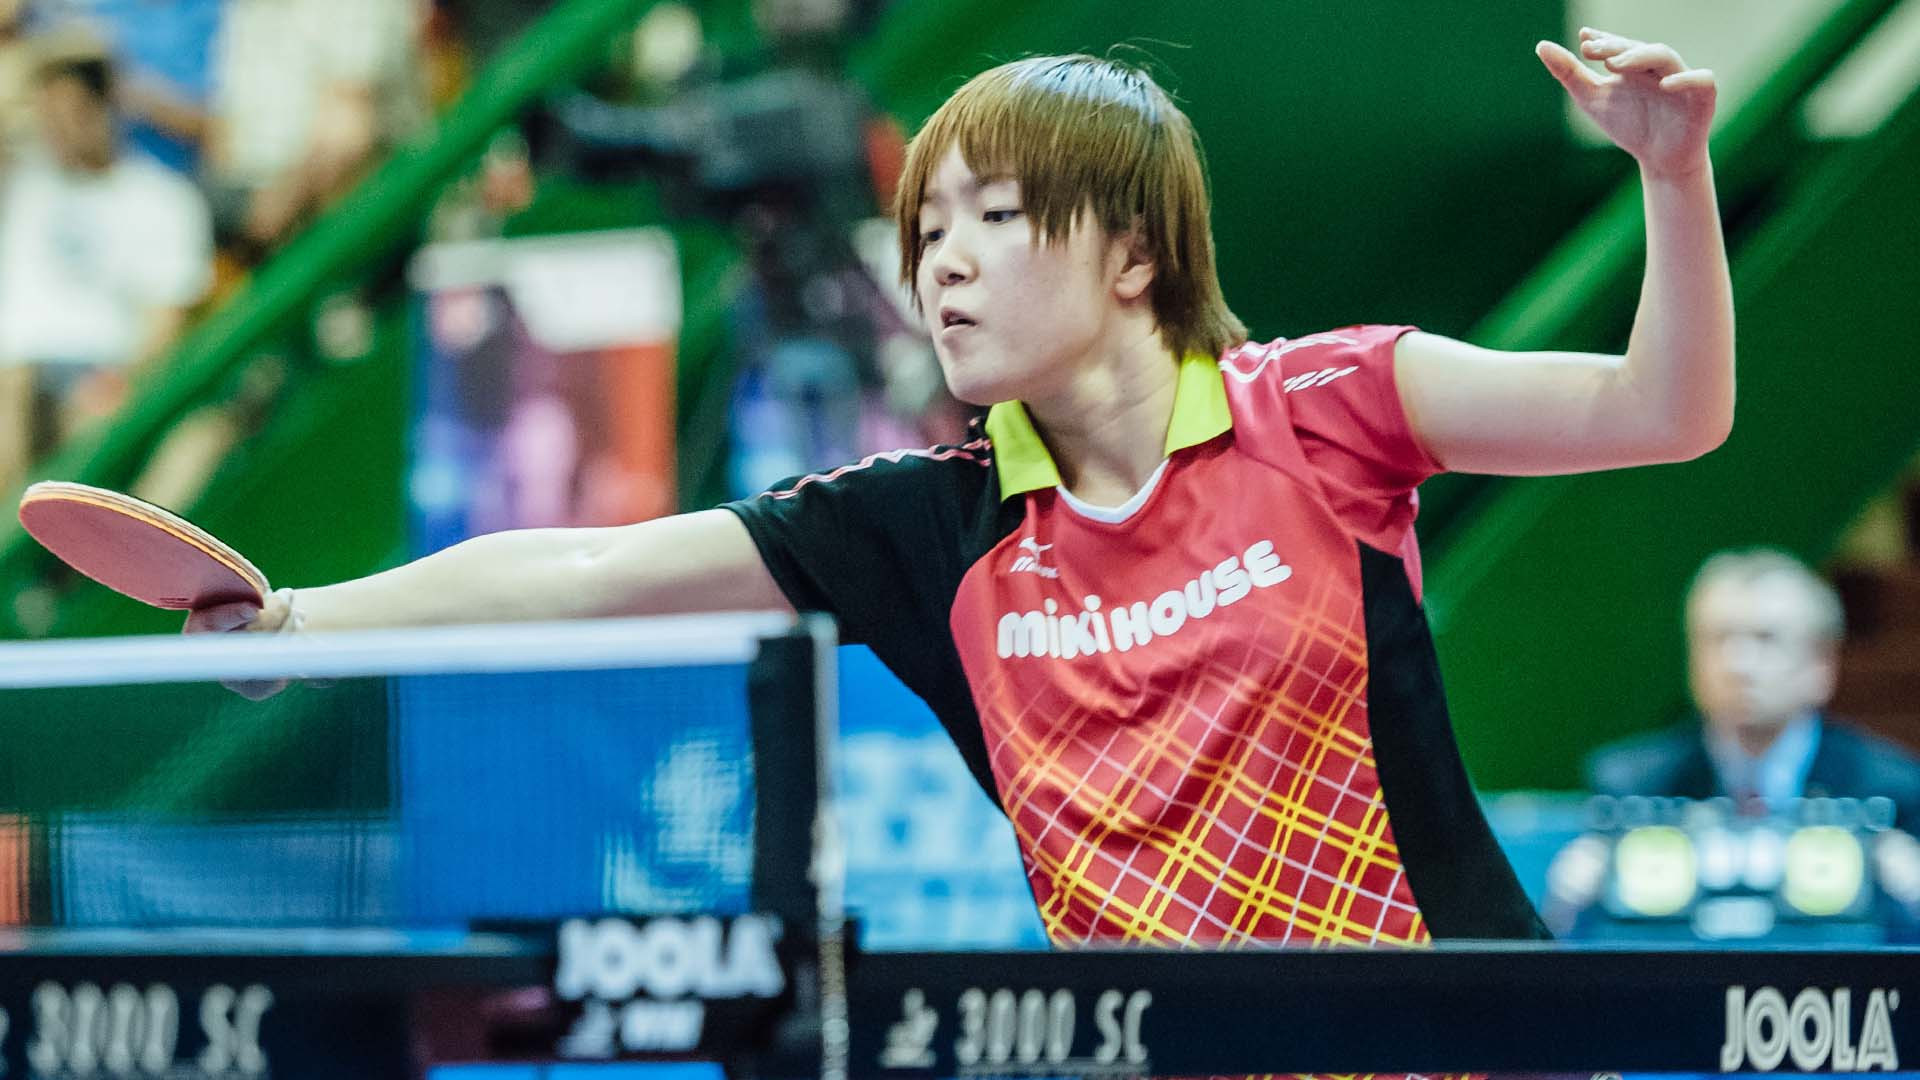 Saki Shibata of Japan beat top seed Zhu Yuling of China on her way to reaching the semi-finals of the women's singles event ©YouTube